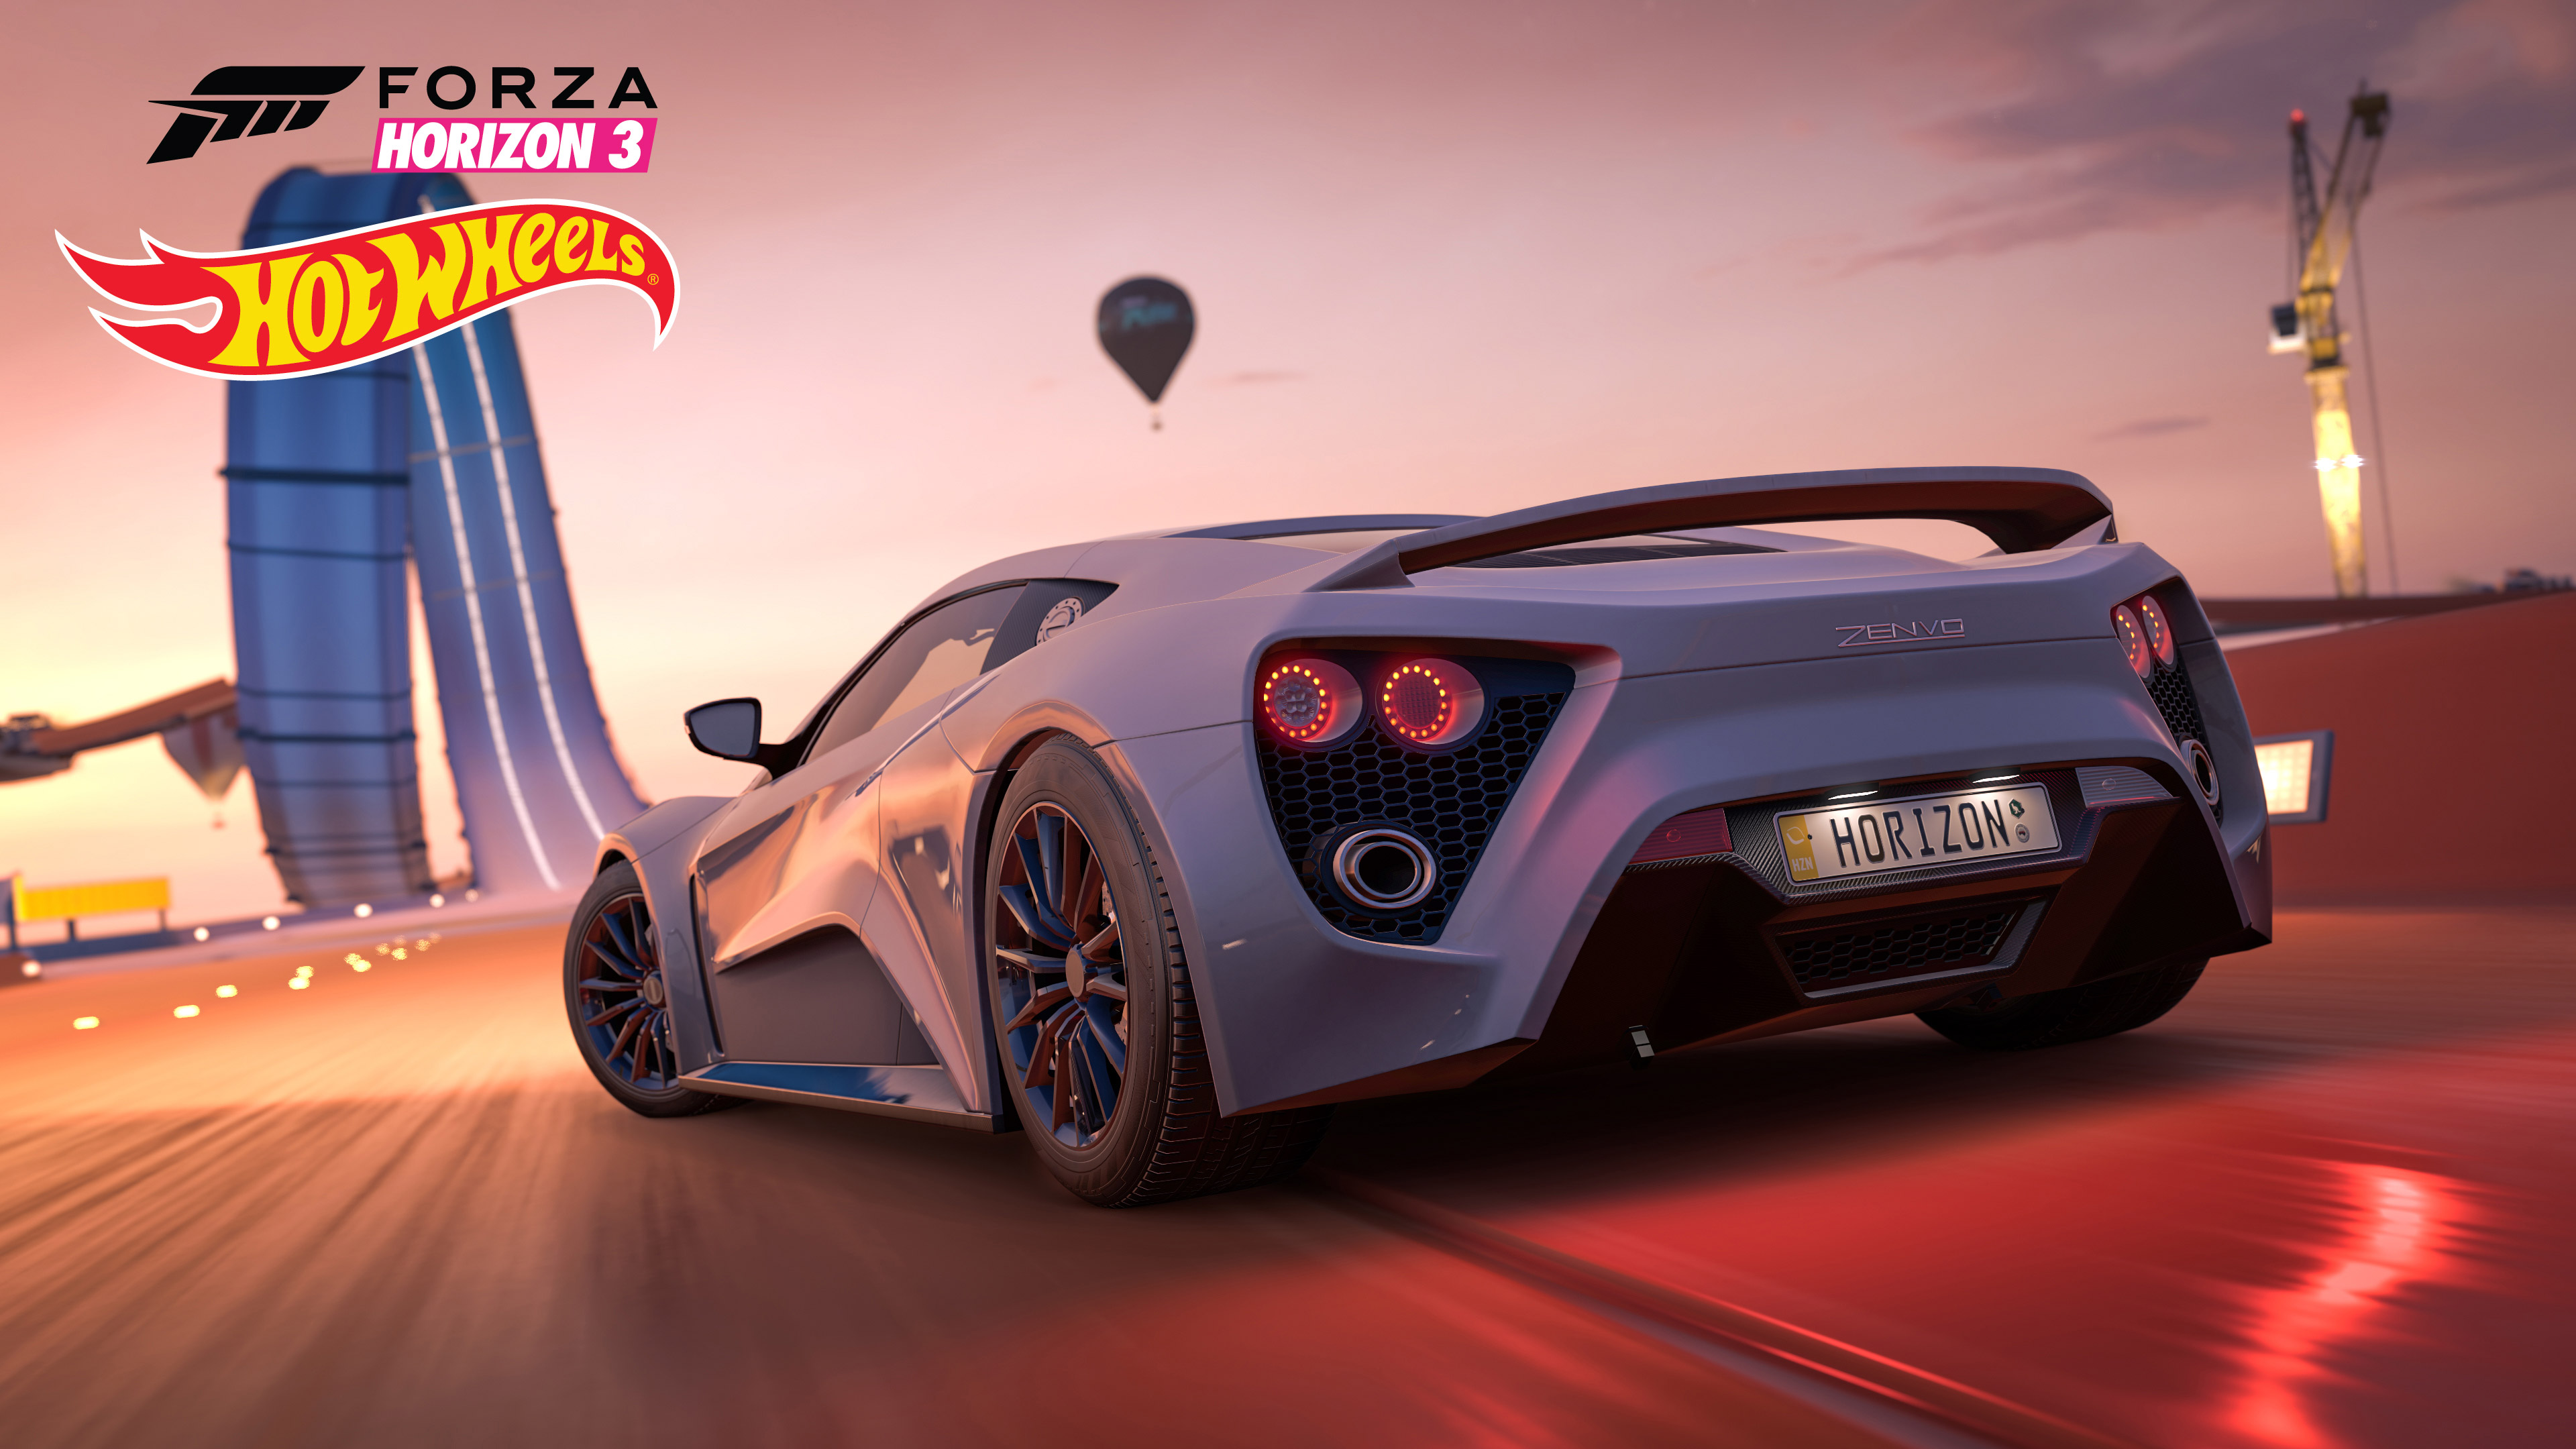 Forza Horizon 3 Hot Wheels, HD Games, 4k Wallpapers, Images, Backgrounds, Photos and Pictures